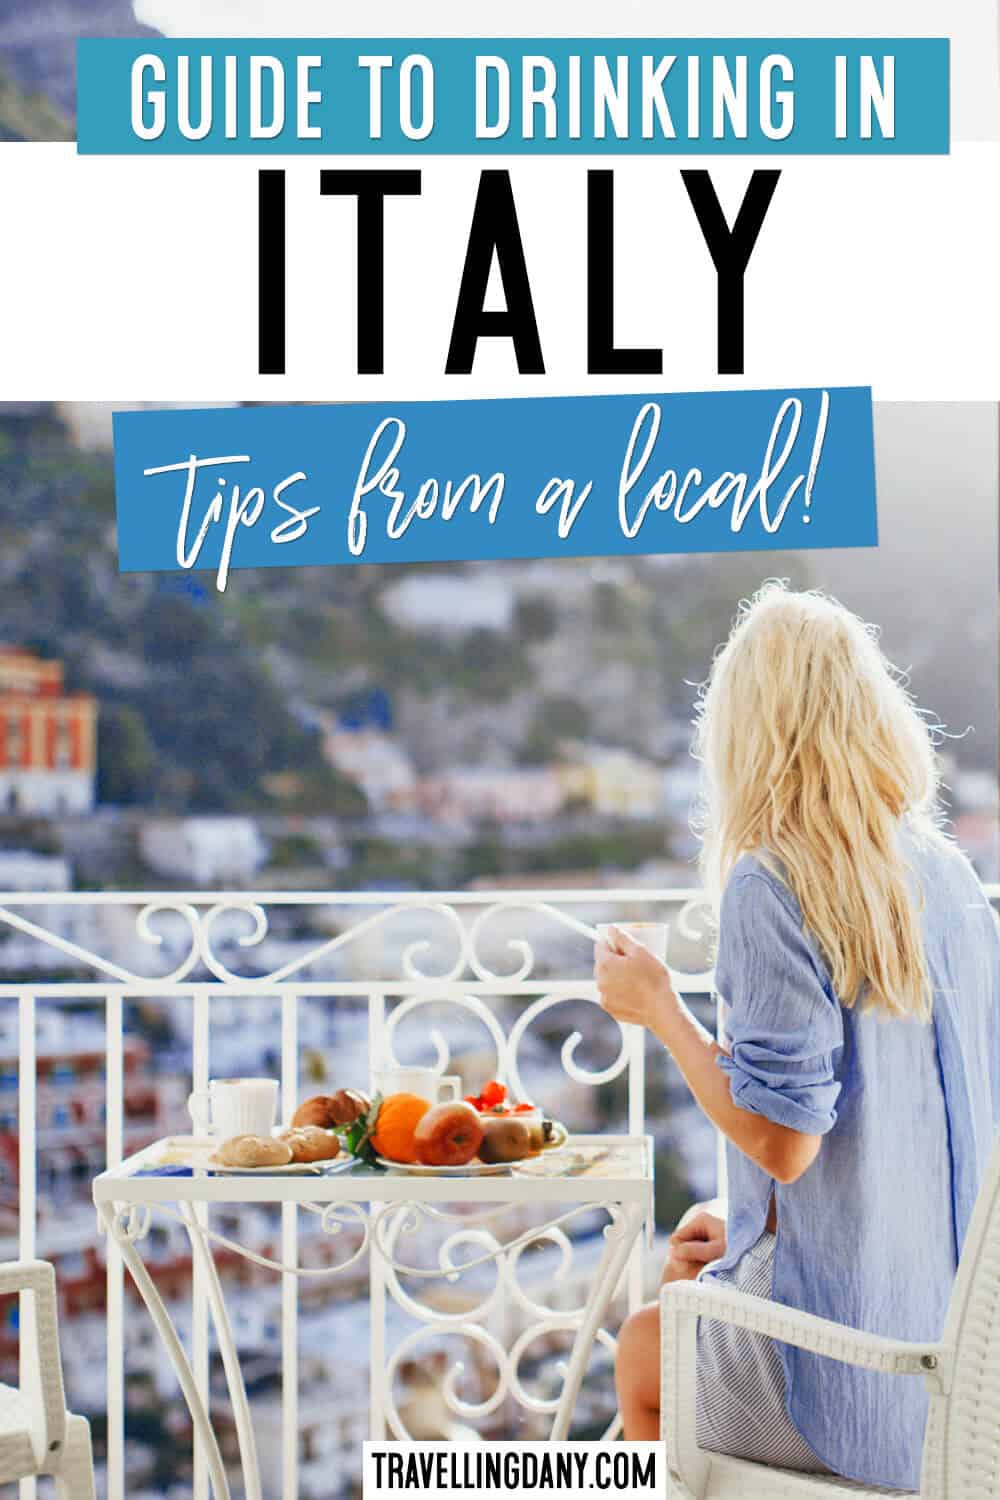 Are you planning your next trip to Italy and you’re looking for some in-depth tips from a local? Let me show you the top Italian drinks and cocktails you should try, because you’re definitely missing out! Discover limoncello, negroni, negroni sbagliato, amaro and many more!